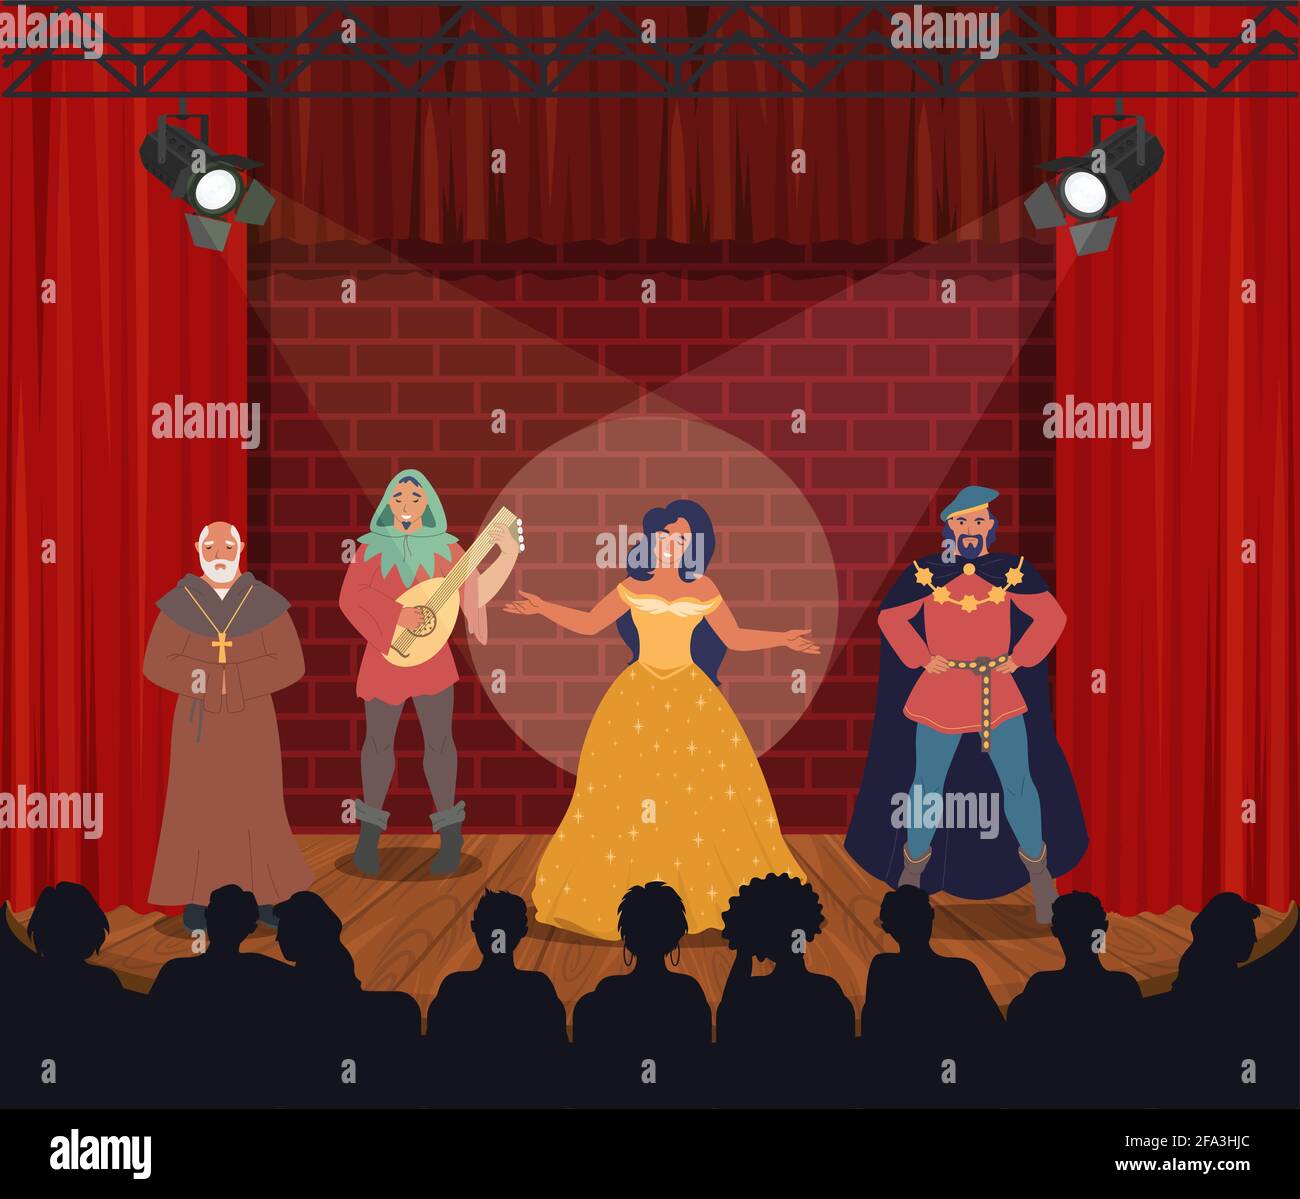 Theatrical performance. Actors performing on stage, vector illustration. Comedy, drama. Entertainment. Theatre arts. Stock Vector